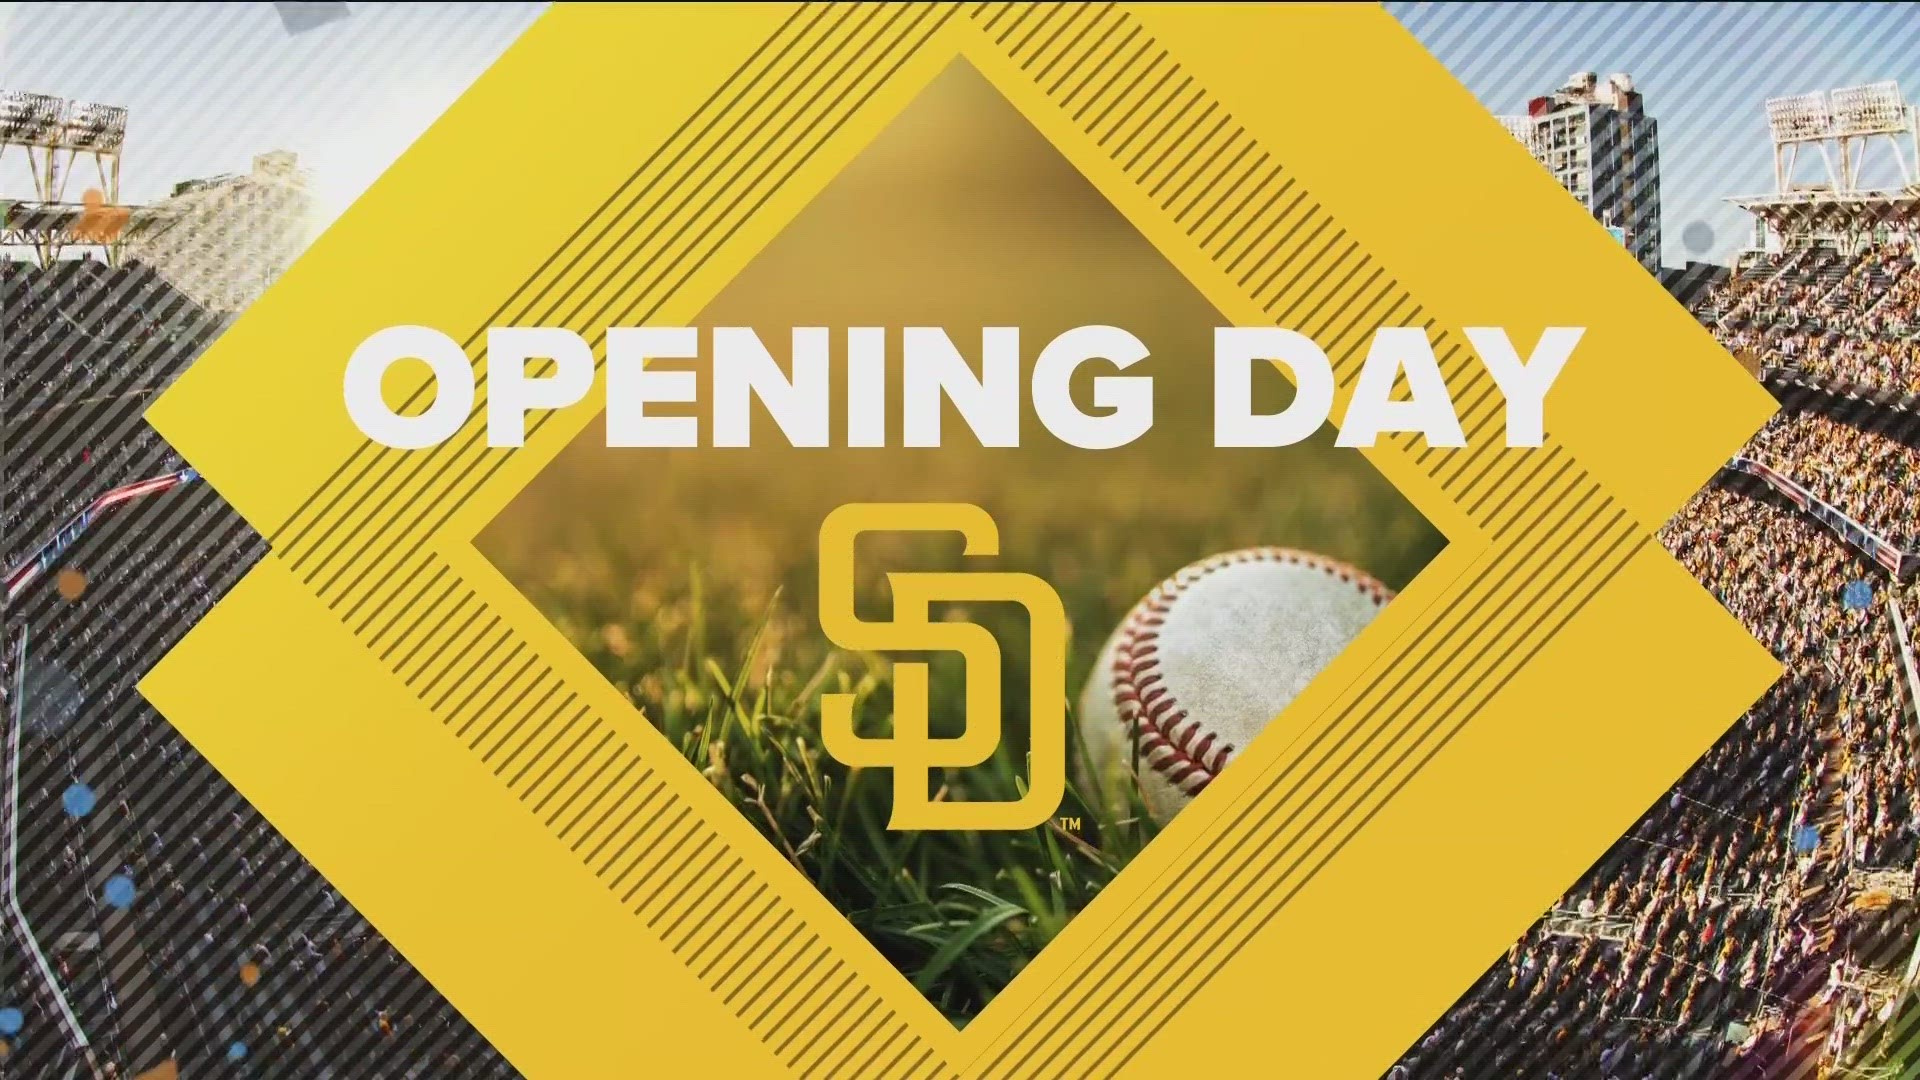 The first pitch in the Padres home opener is at 1:10 p.m. with right-handed pitcher Yu Darvish taking the mound.